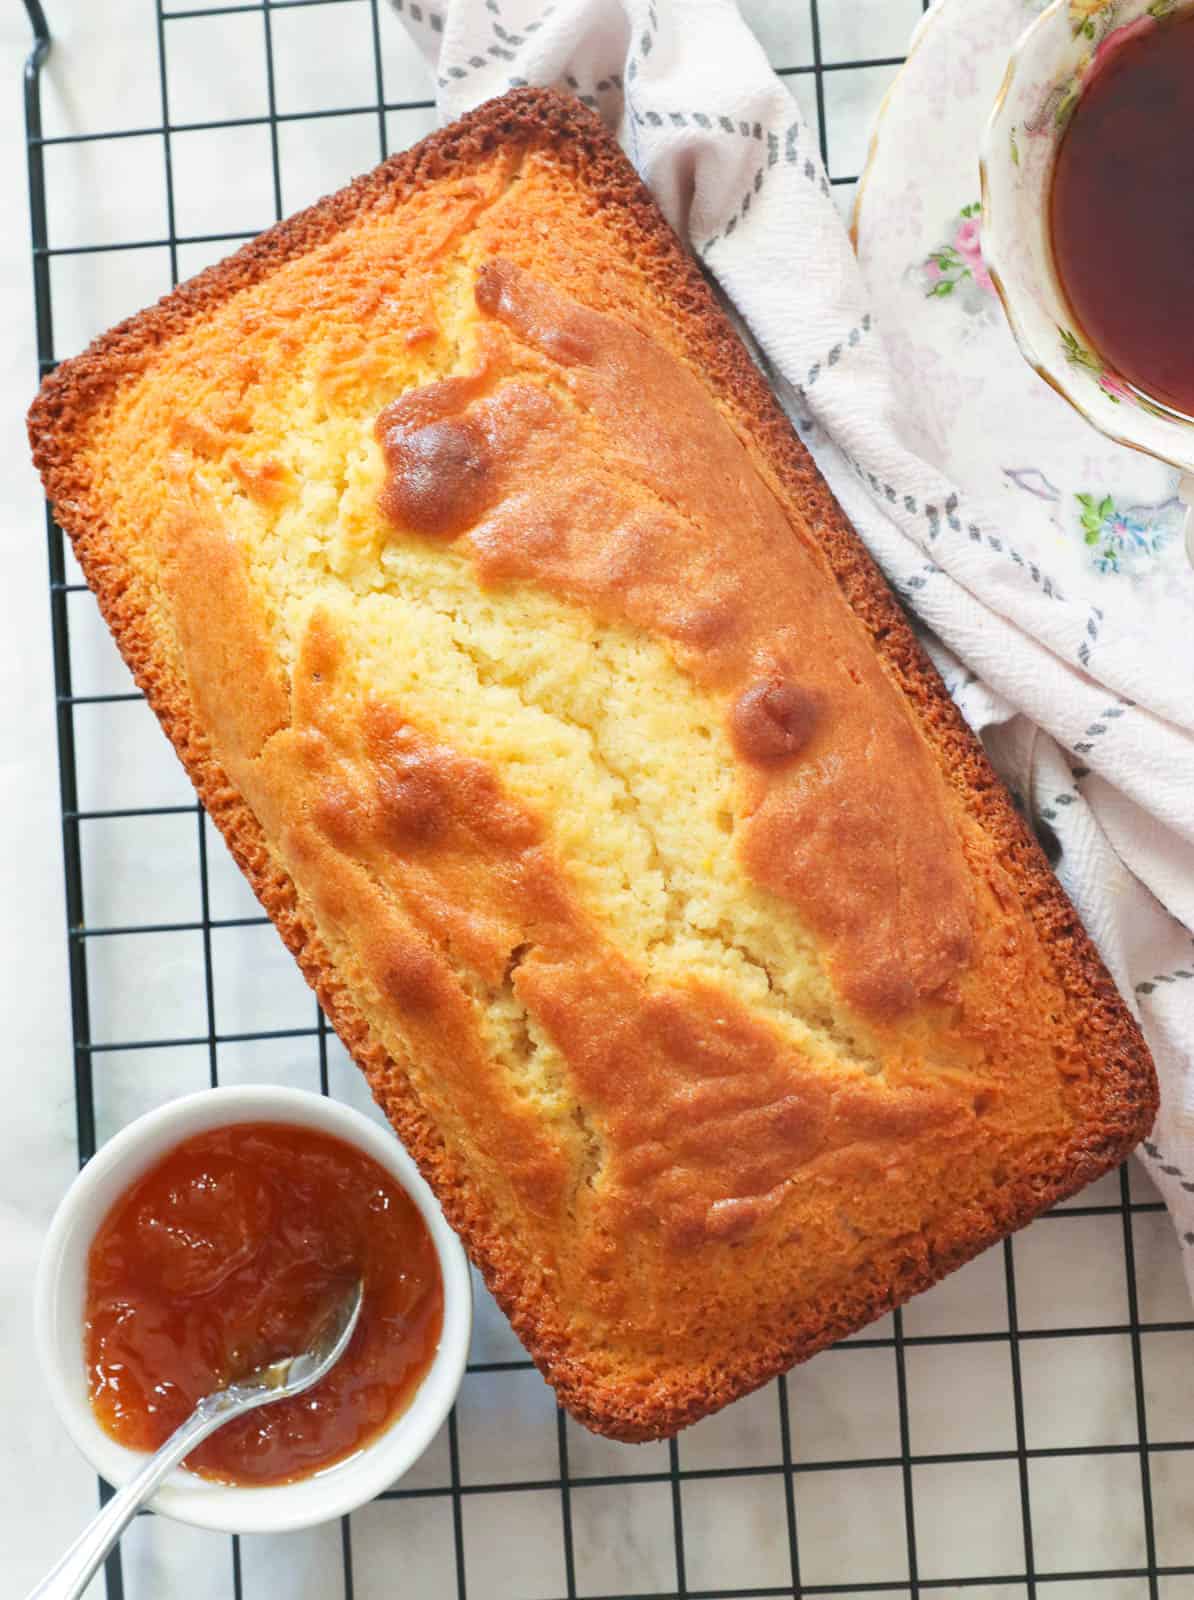 Whole French Yogurt Cake with marmalade on the cooling rack